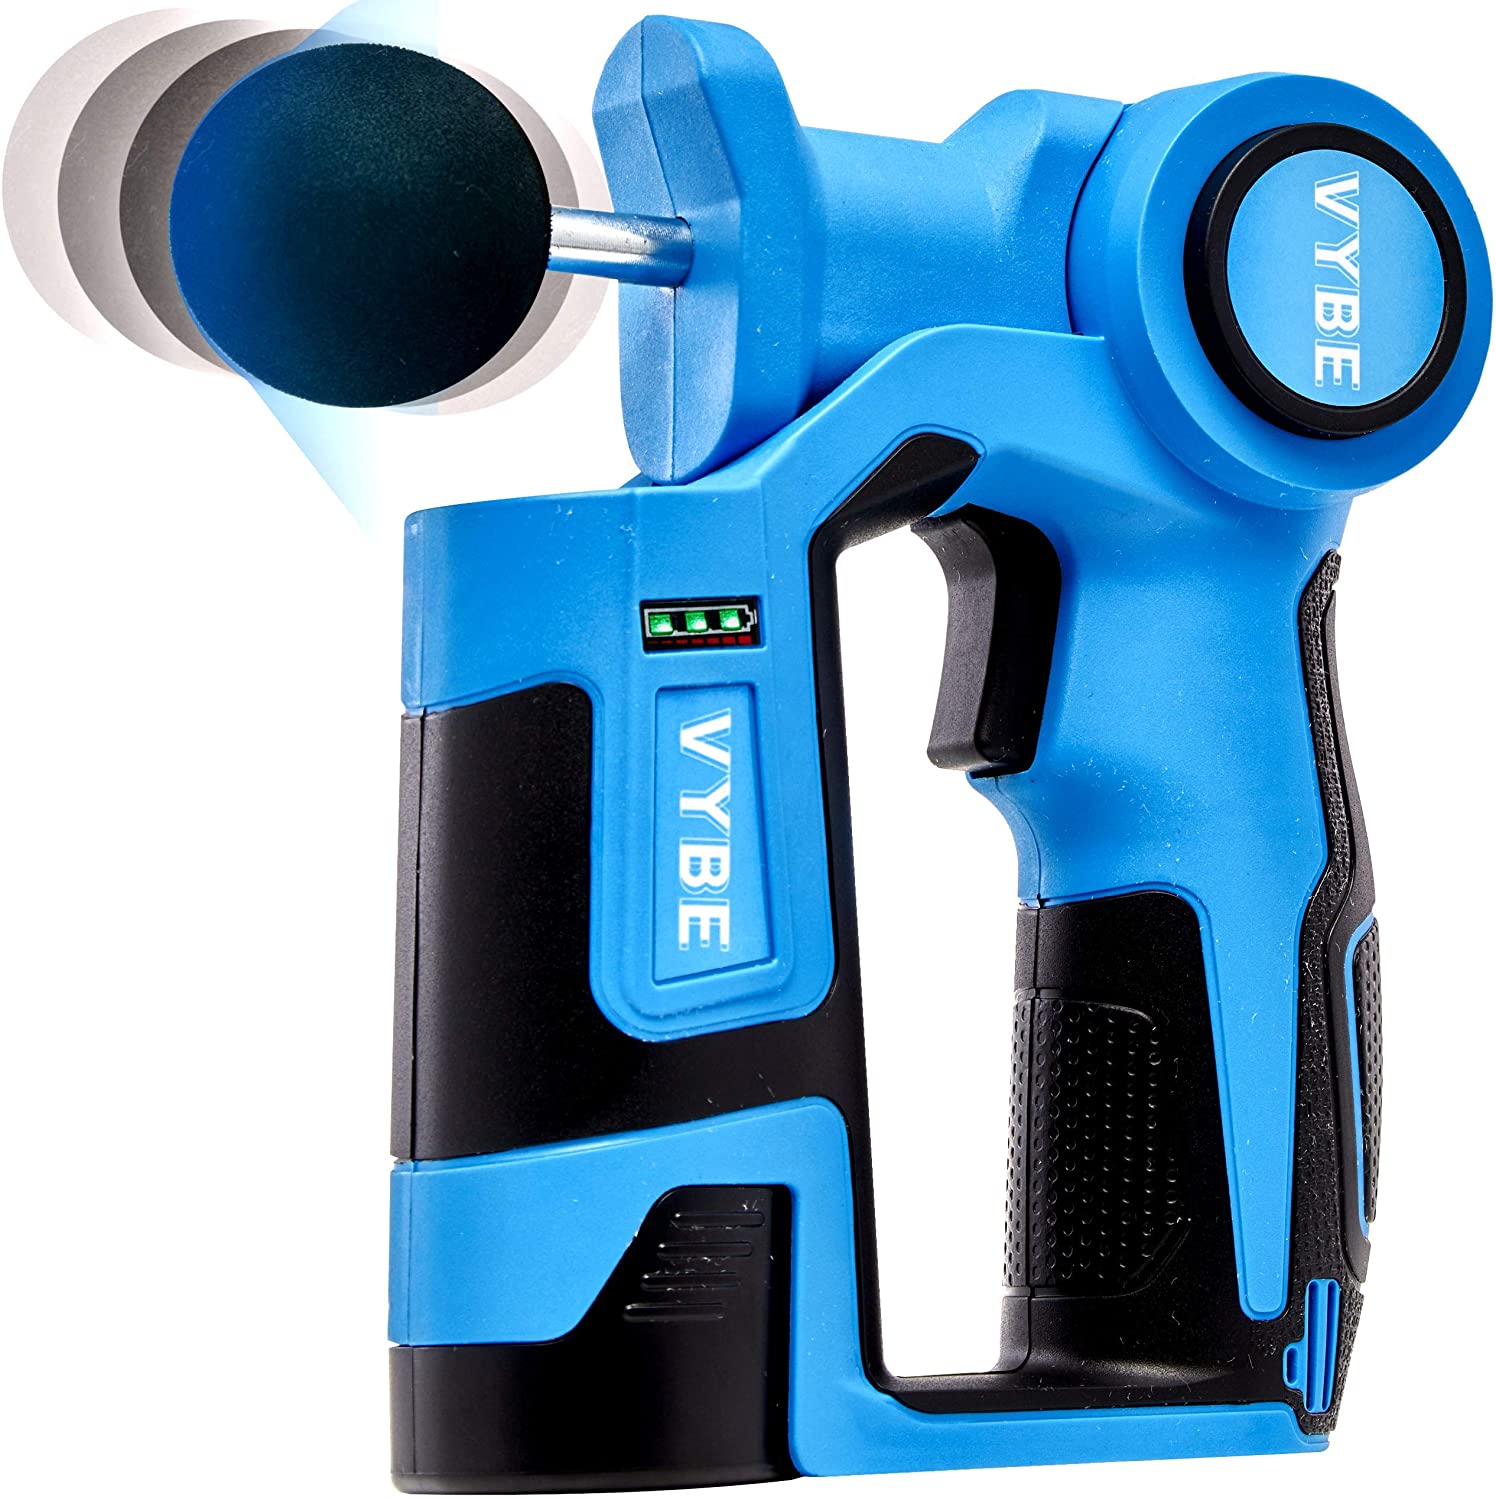 Vybe Percussion Deep Tissue Massage Gun $85 + Free Shipping